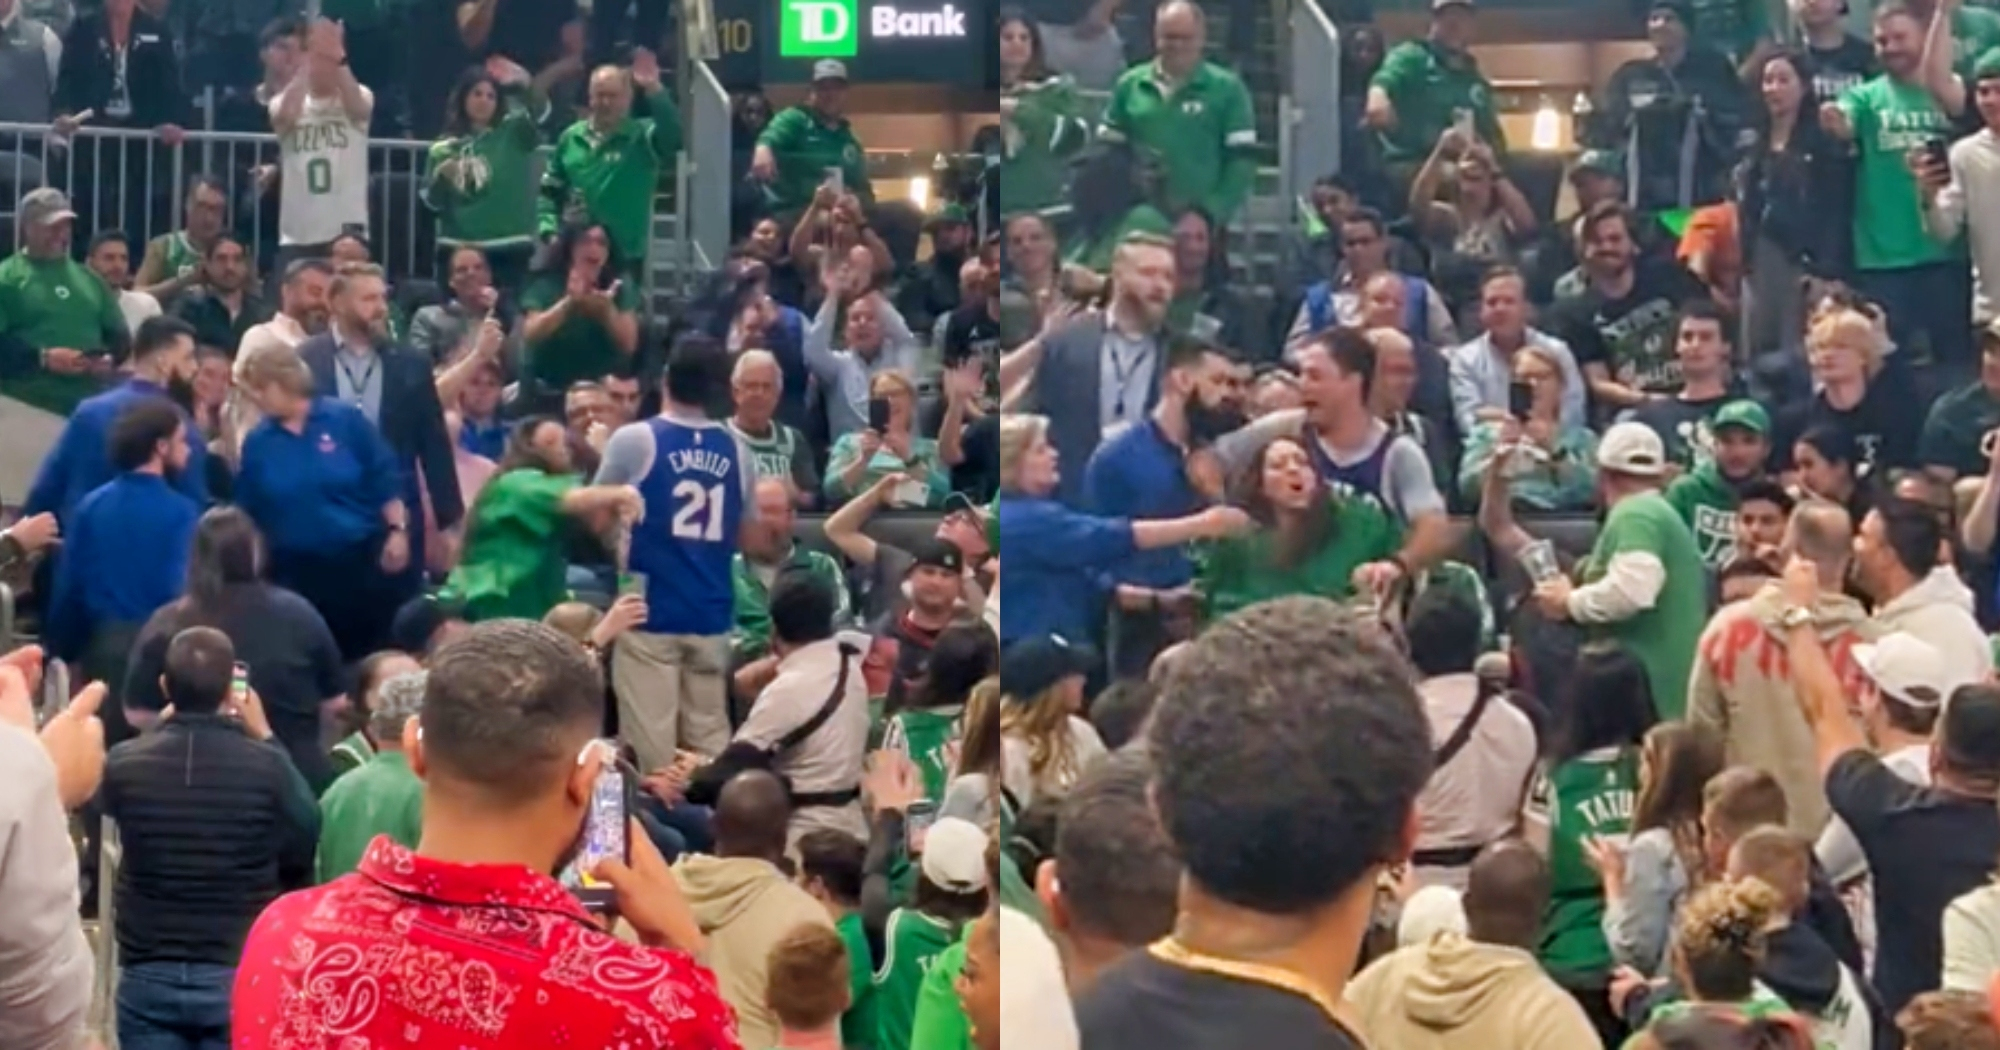 Celtics Fan Throws Drink Then Spits At Fans During Playoff Game